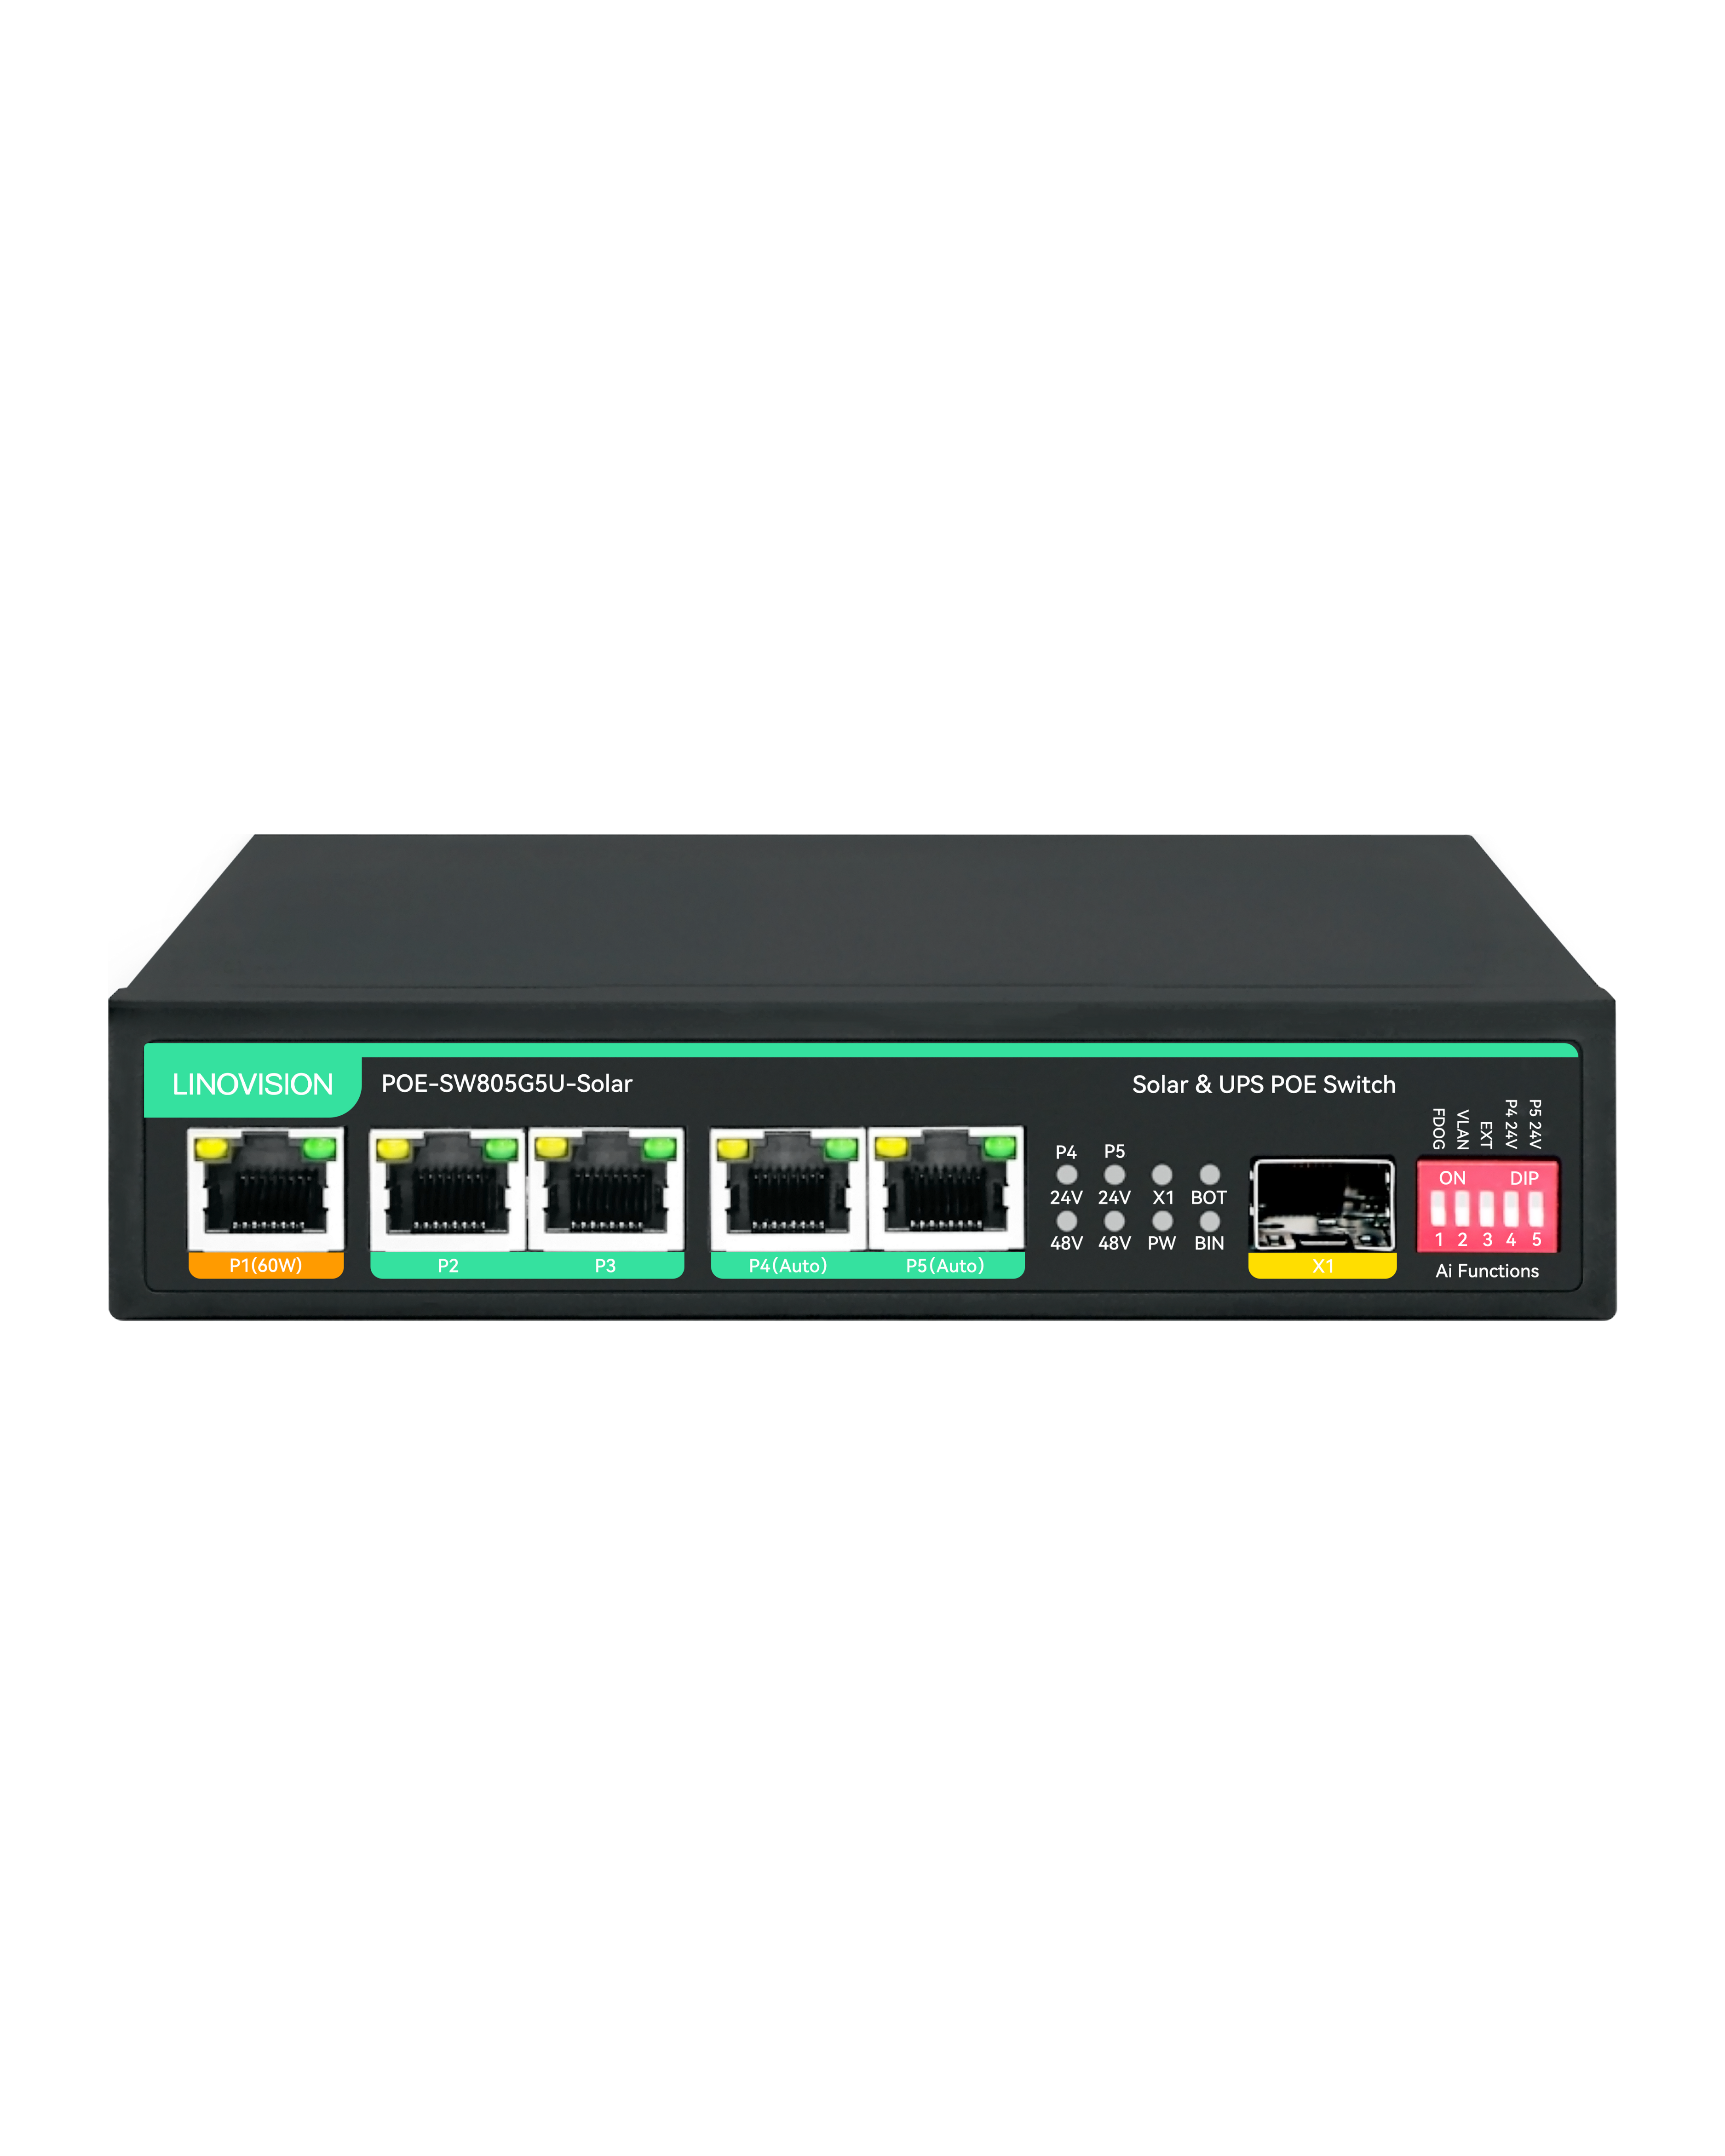 5 Ports Solar and UPS PoE Switch with built-in Solar Charge